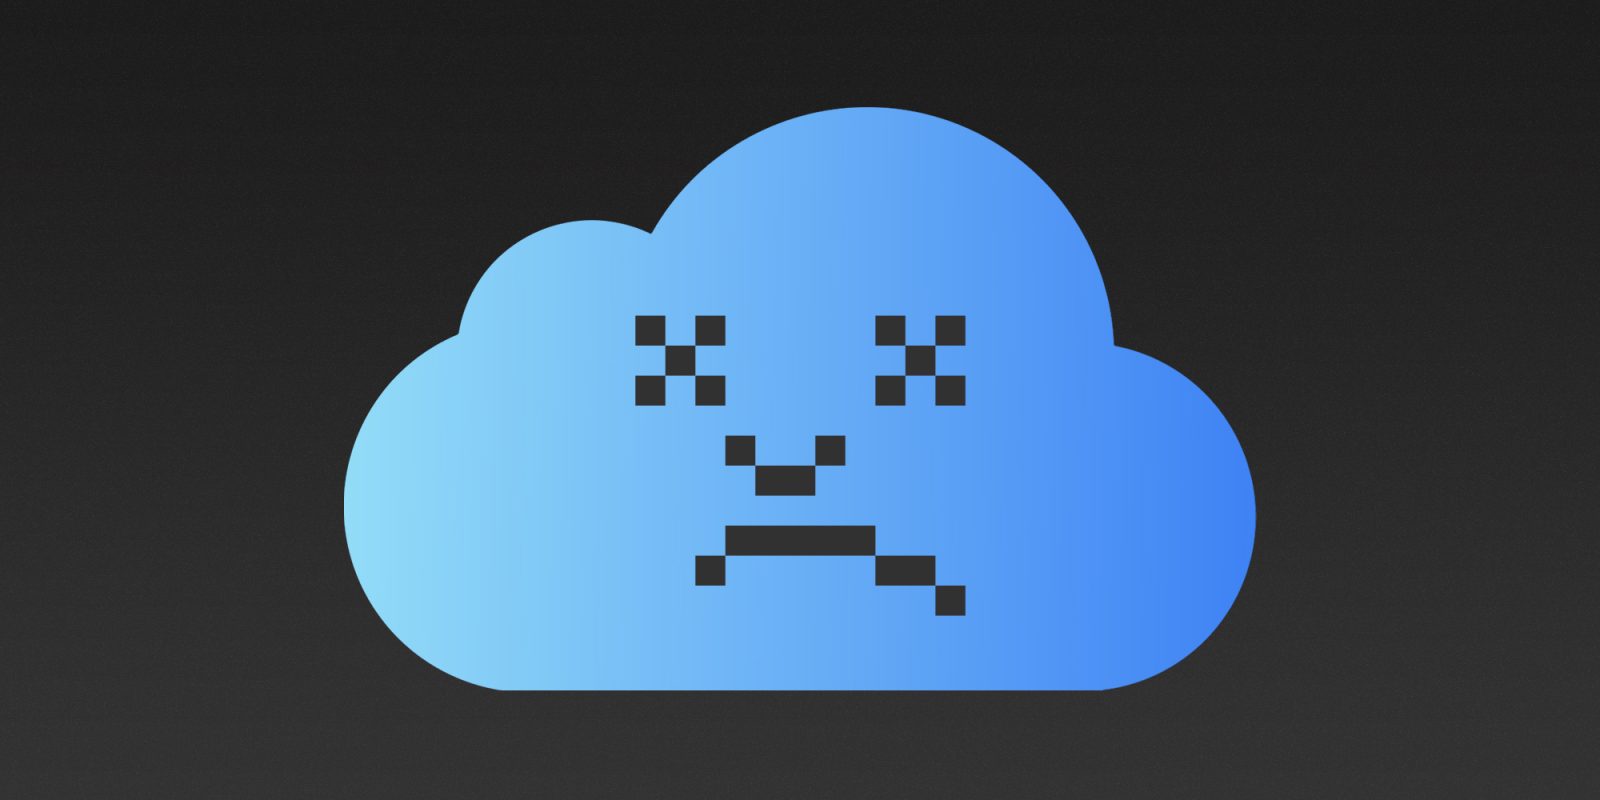 Some iCloud services are currently down due to unexpected outage [U]